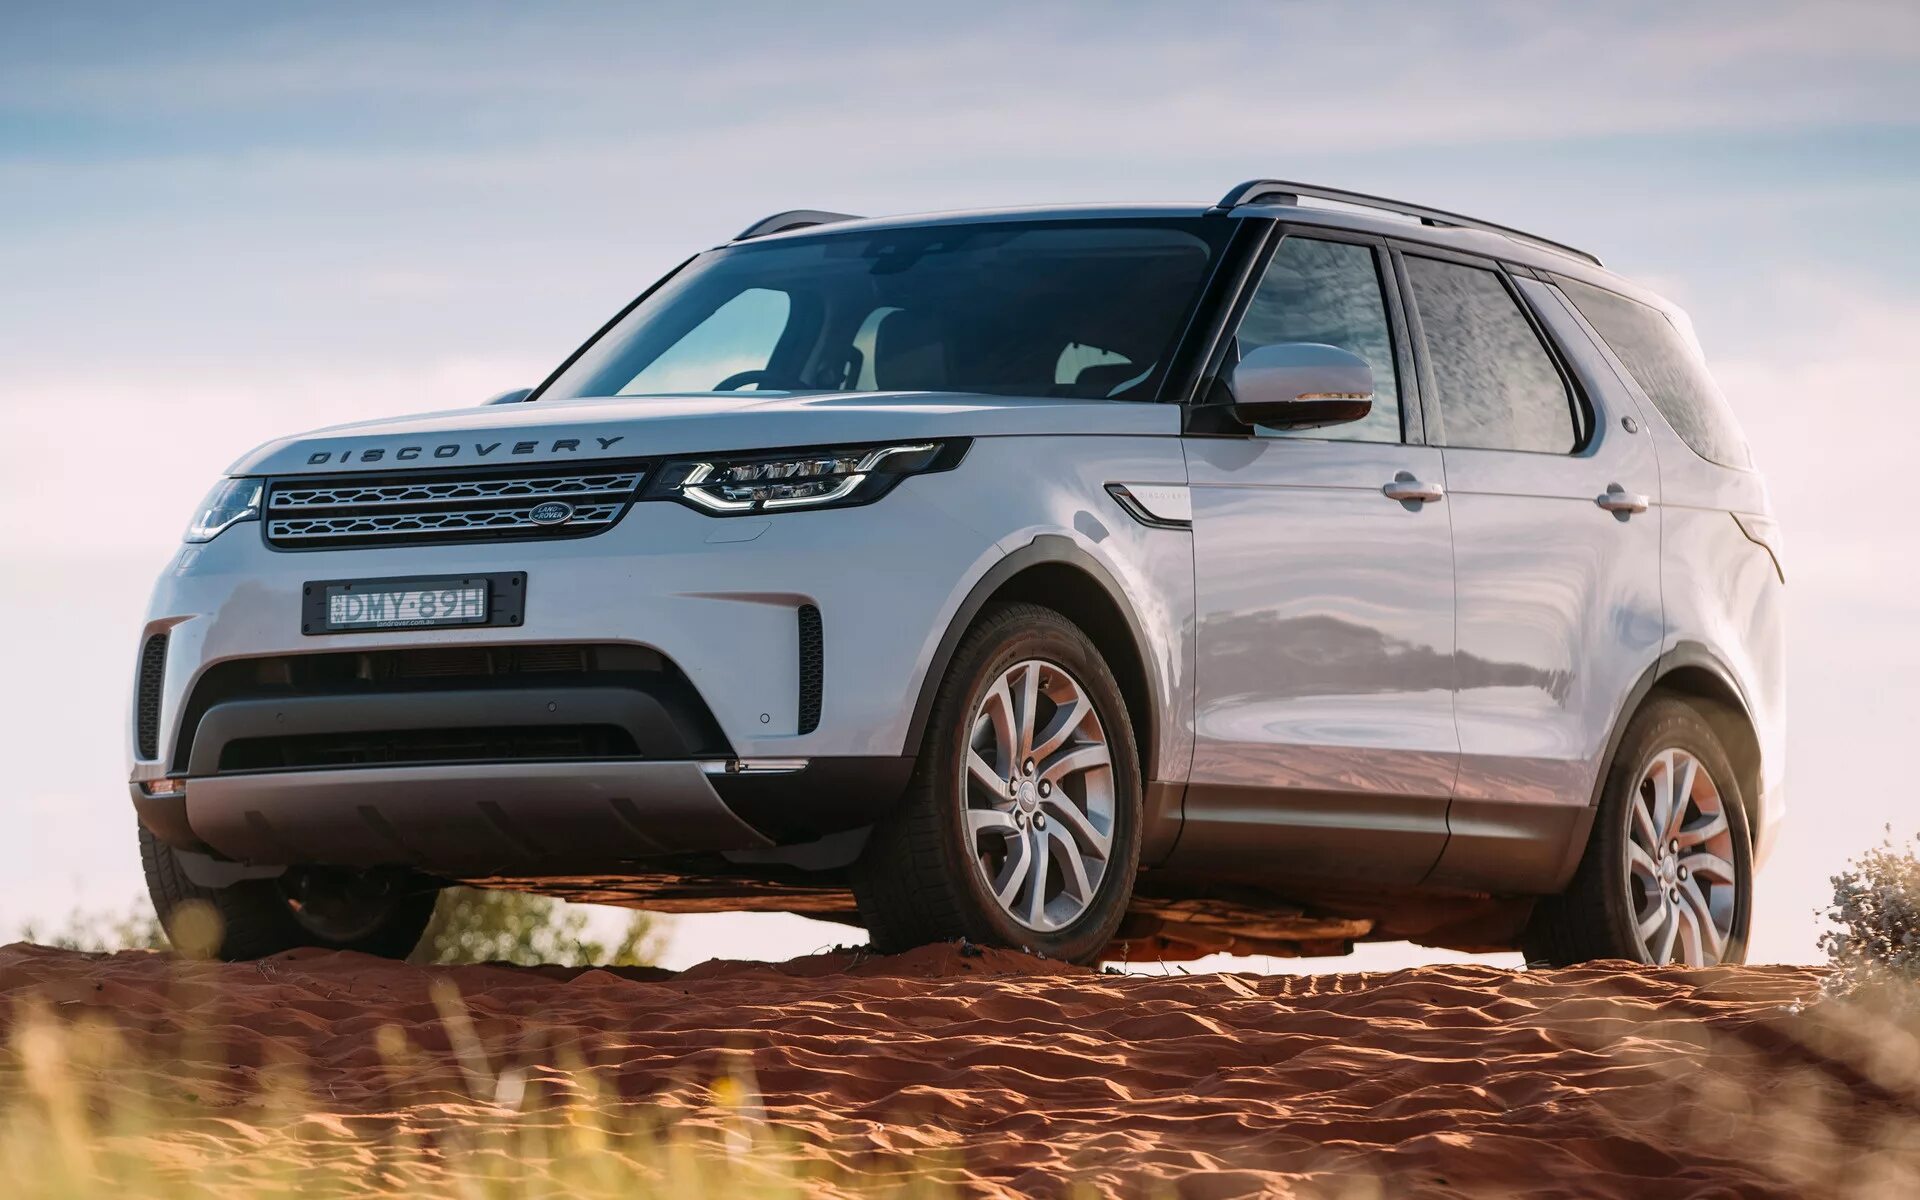 Land Rover Discovery 2022. Ленд Ровер Discovery 2017. Ленд Ровер Дискавери 4 2017. Ленд Ровер Дискавери 2021.